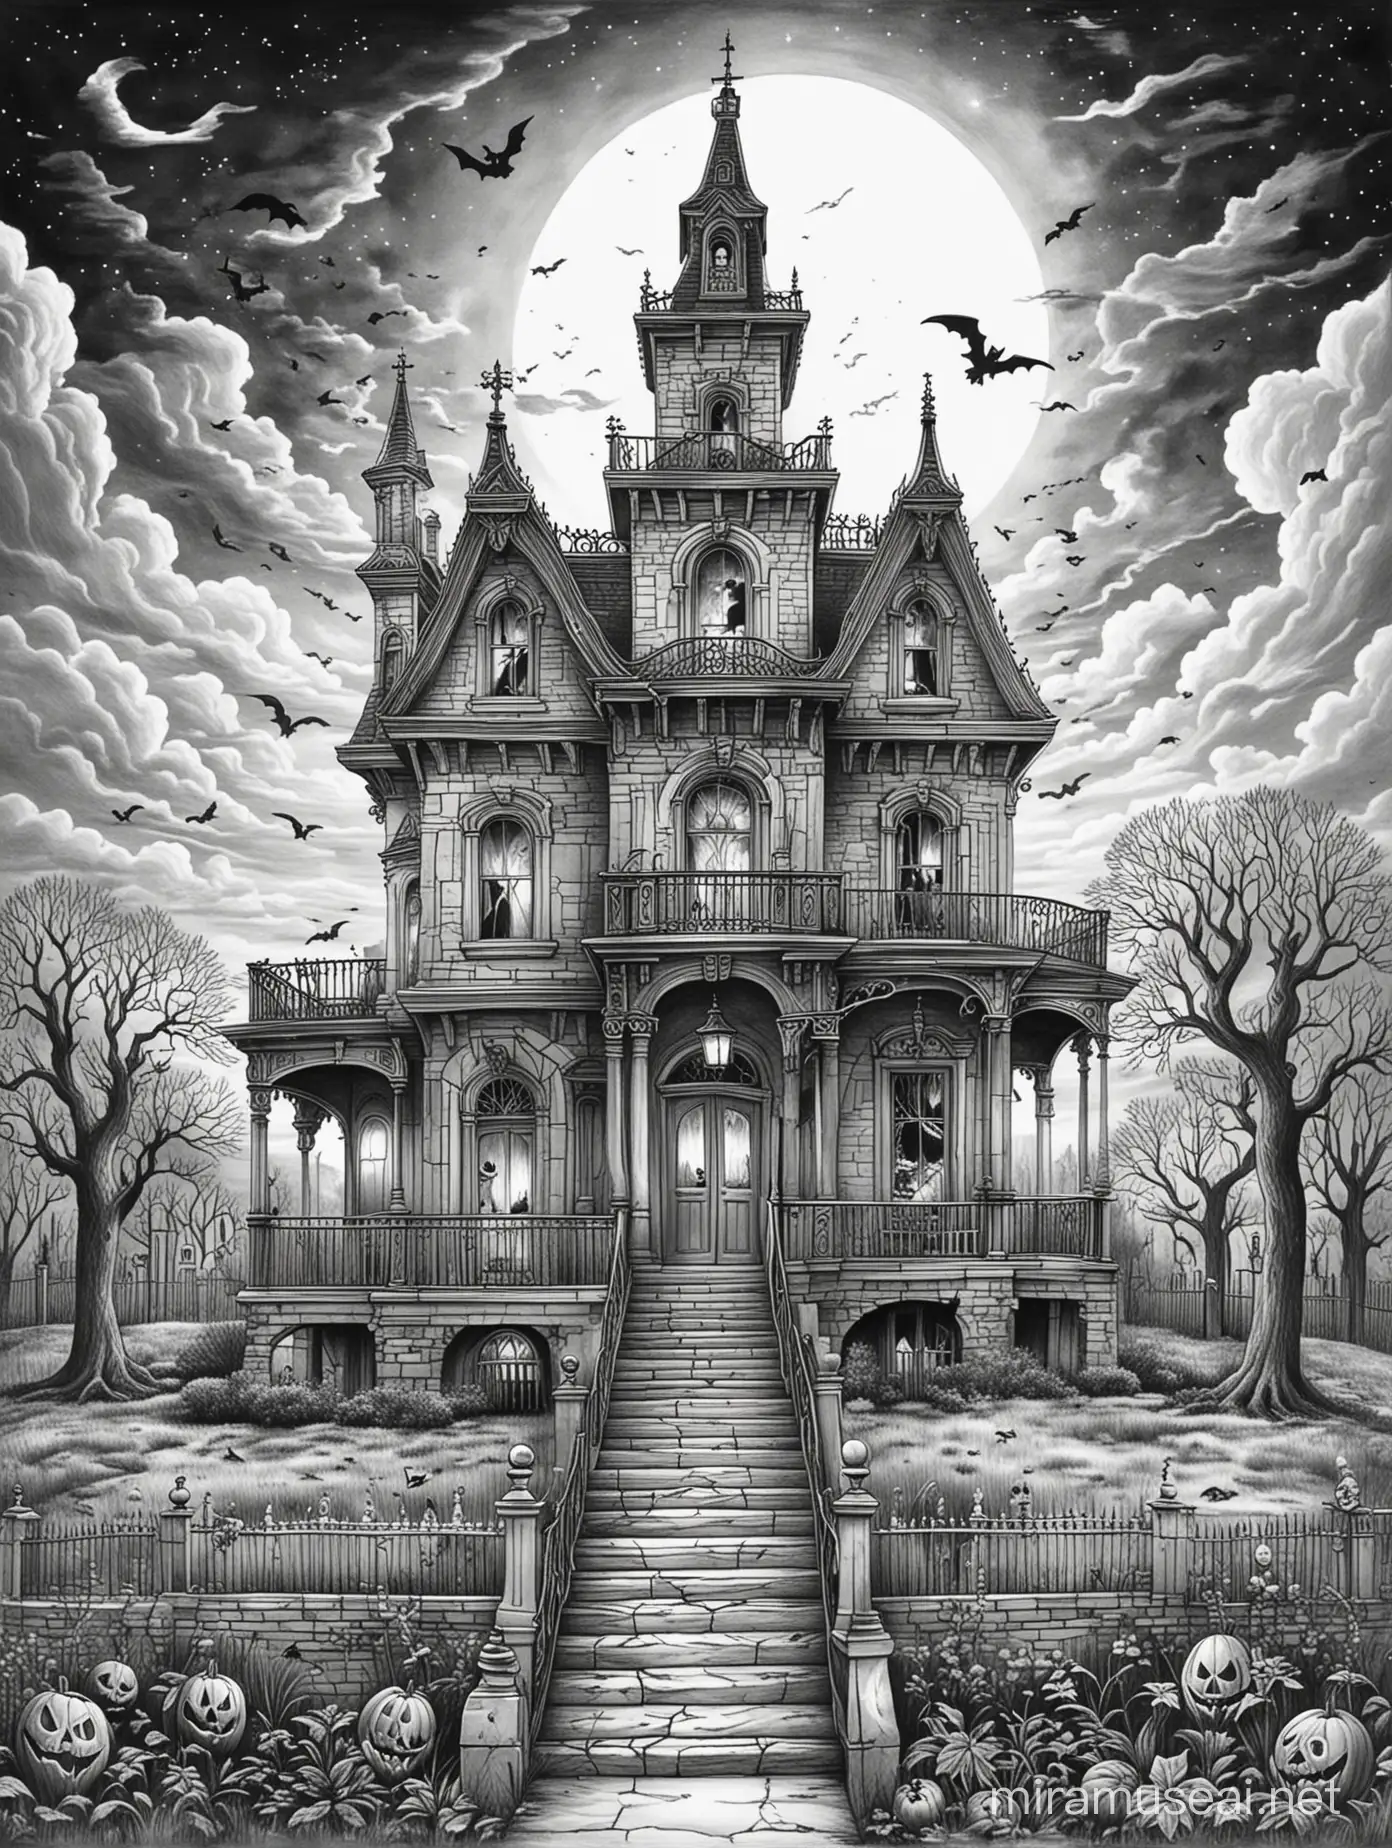 outline for coloring pages, draw a haunted mansion, mystery sky, only the outline in black, white background,no color,